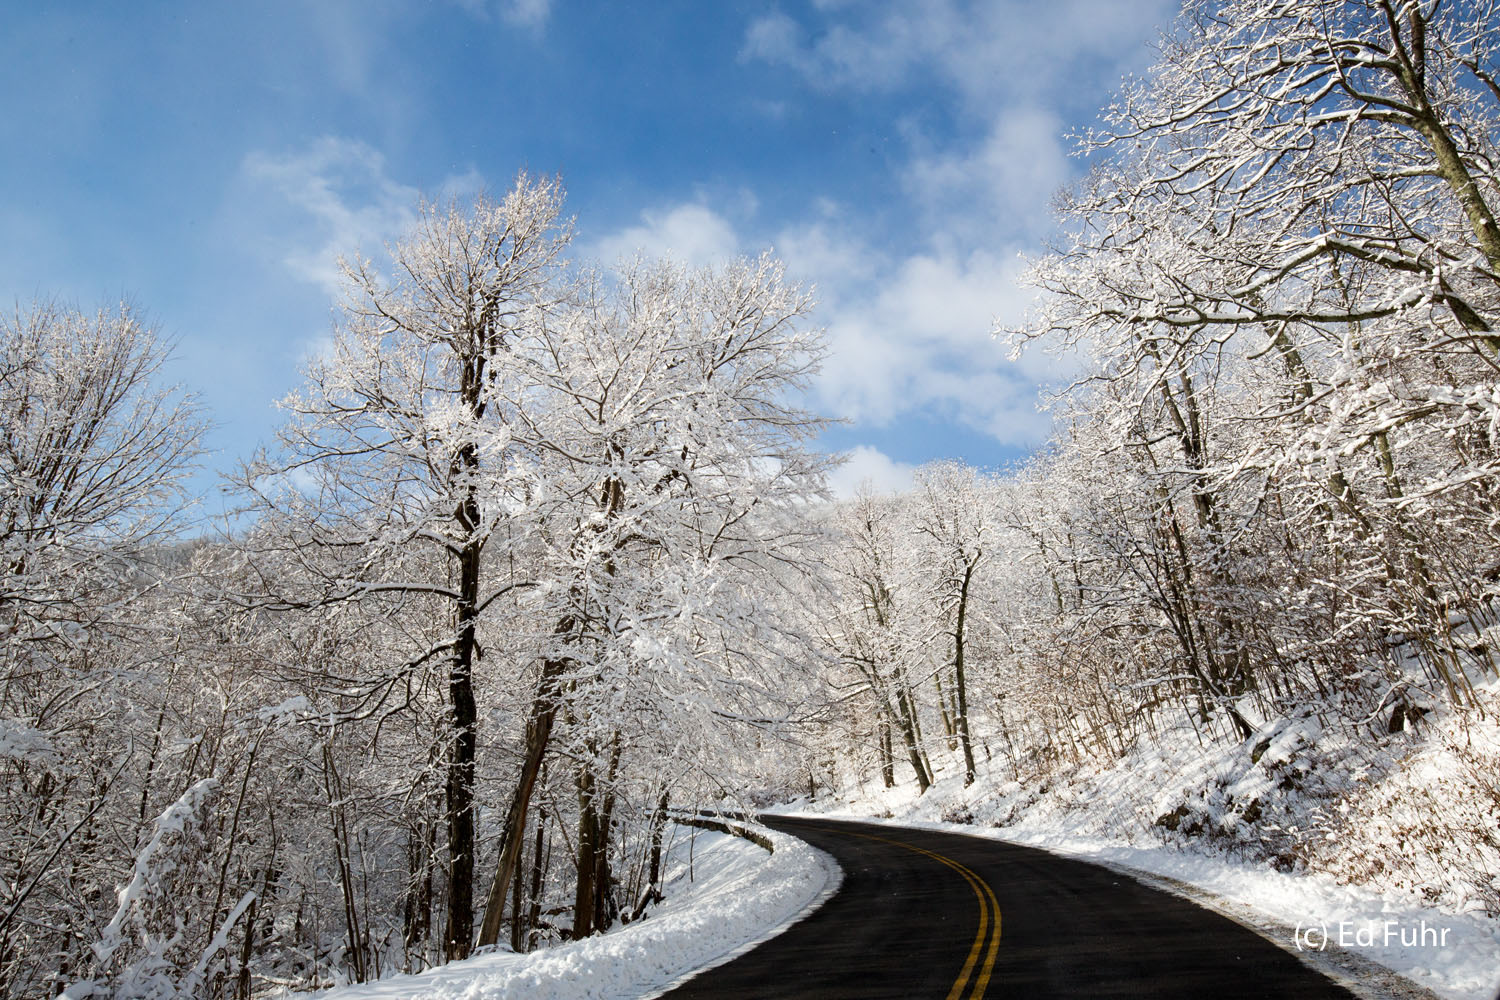 Skyline Drive is always a stunning 100 mile drive but on this winter morning, the Drive is open only to those willing to hike...